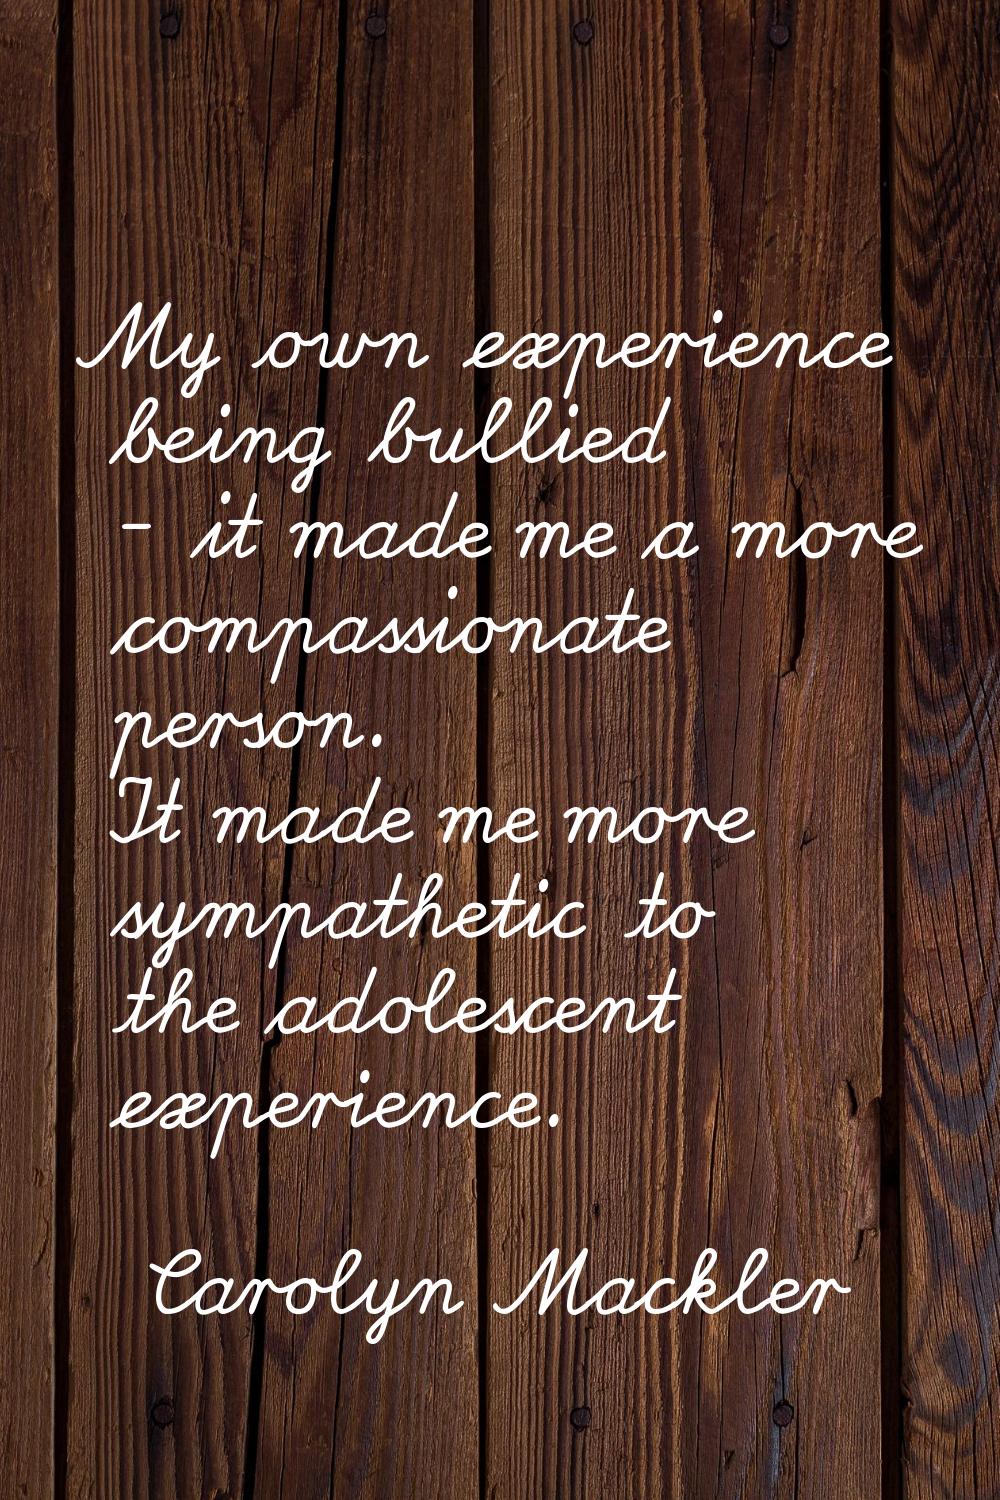 My own experience being bullied - it made me a more compassionate person. It made me more sympathet